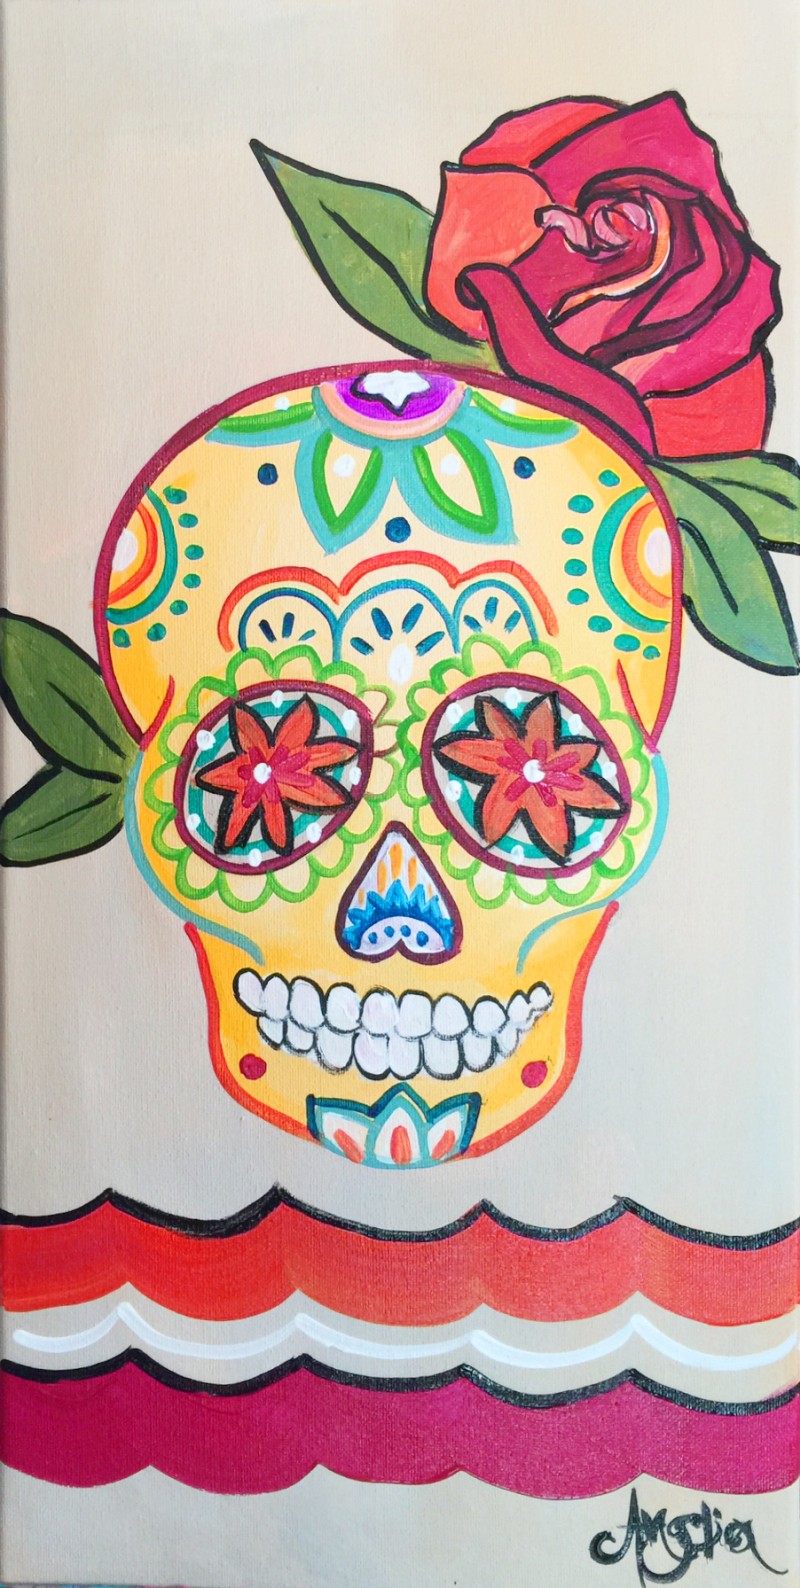 ON WHEELS at Twisted Dristrict Brewery: Springtime Sugar Skull